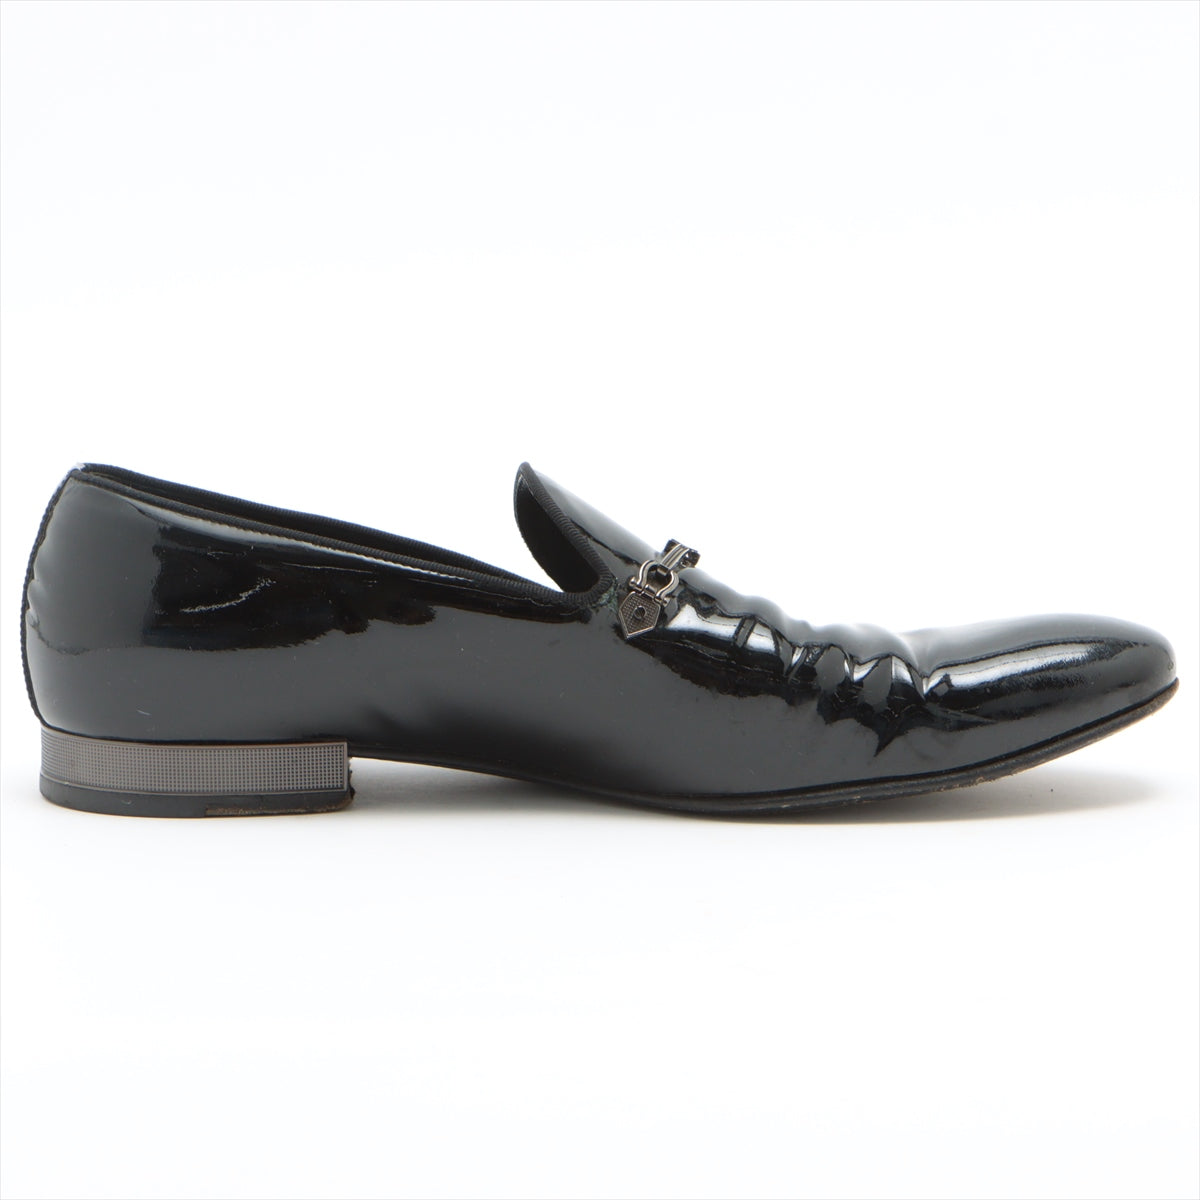 Louis Vuitton 13 years Patent leather Loafer 6 1/2 Men's Black ST0193